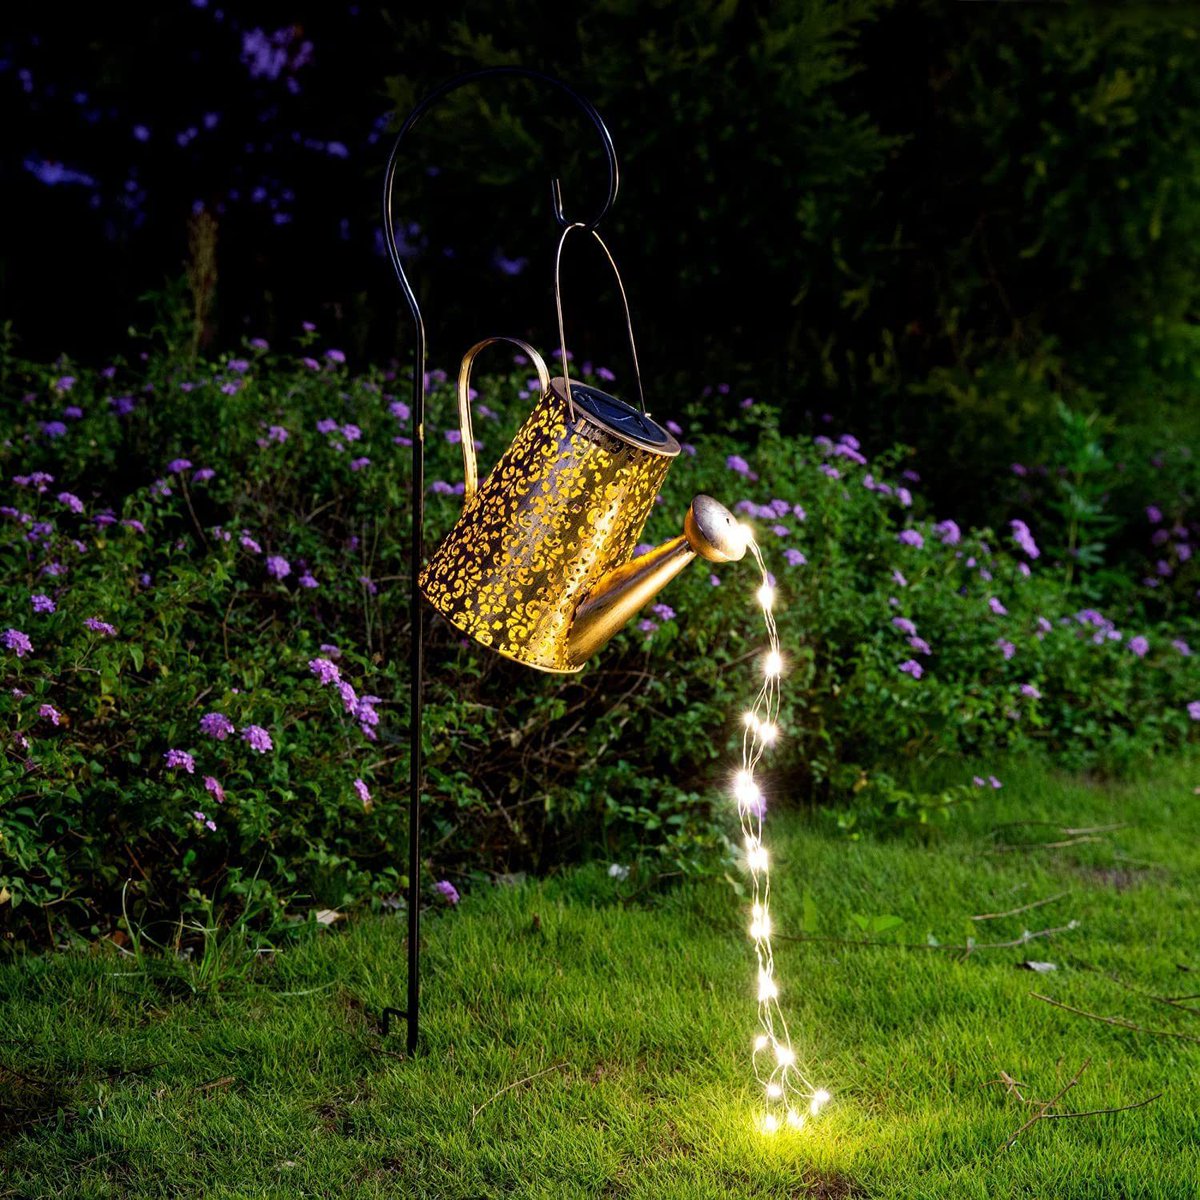 Illuminate your outdoor garden path with our hanging lanterns from sunlitbackyardoasis.com! Create a cozy and inviting atmosphere with these beautiful lights. #outdoorlighting #gardenpath #hanginglanterns.